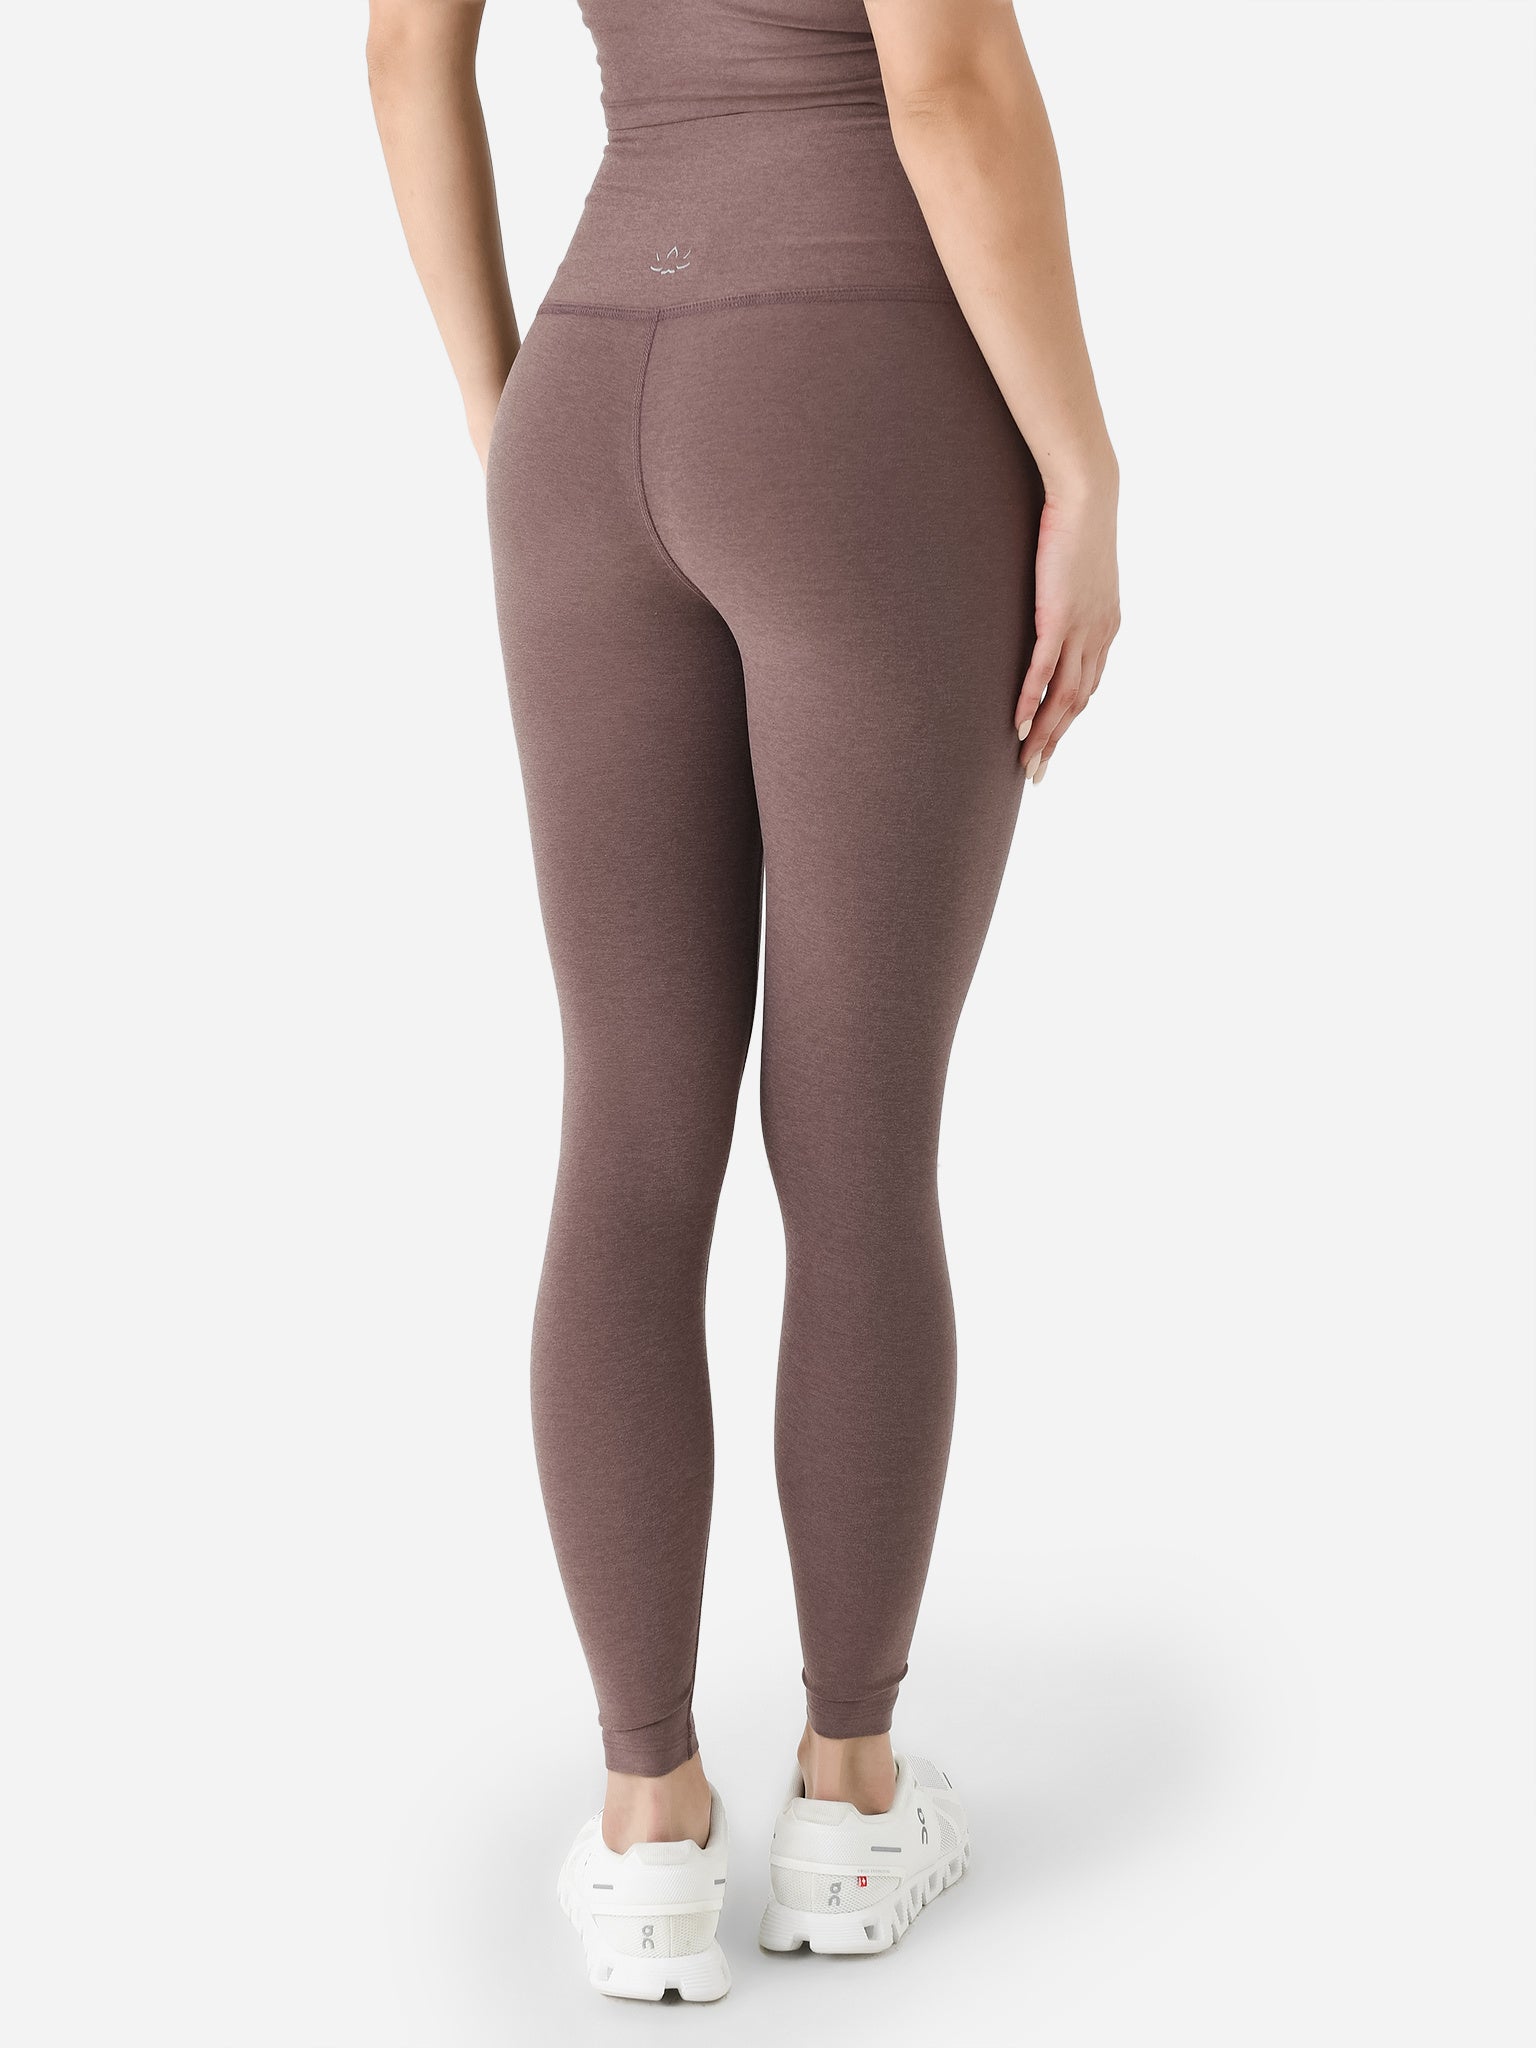 Beyond Yoga Spacedye Caught in the Midi High Waisted Legging in Sienna  Brown Heather